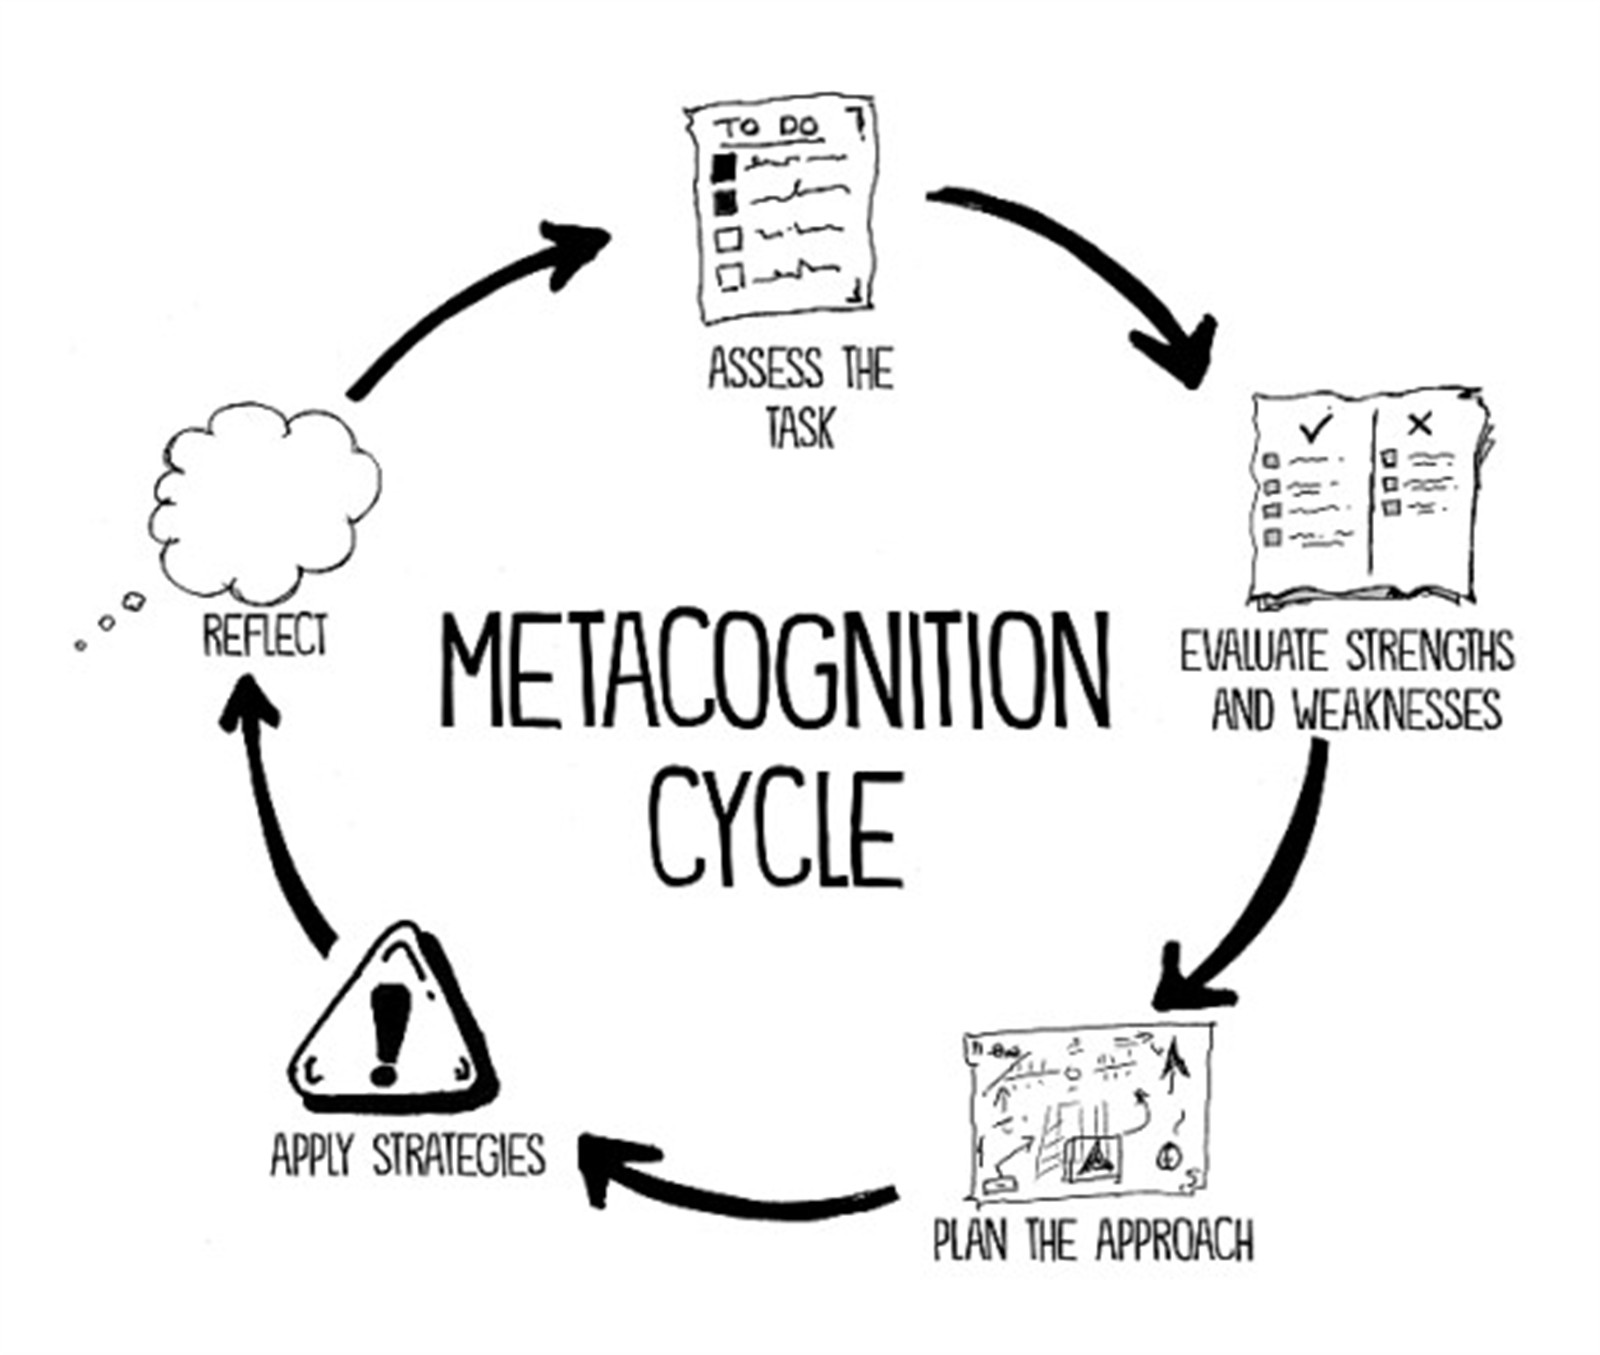 metacognition cycle